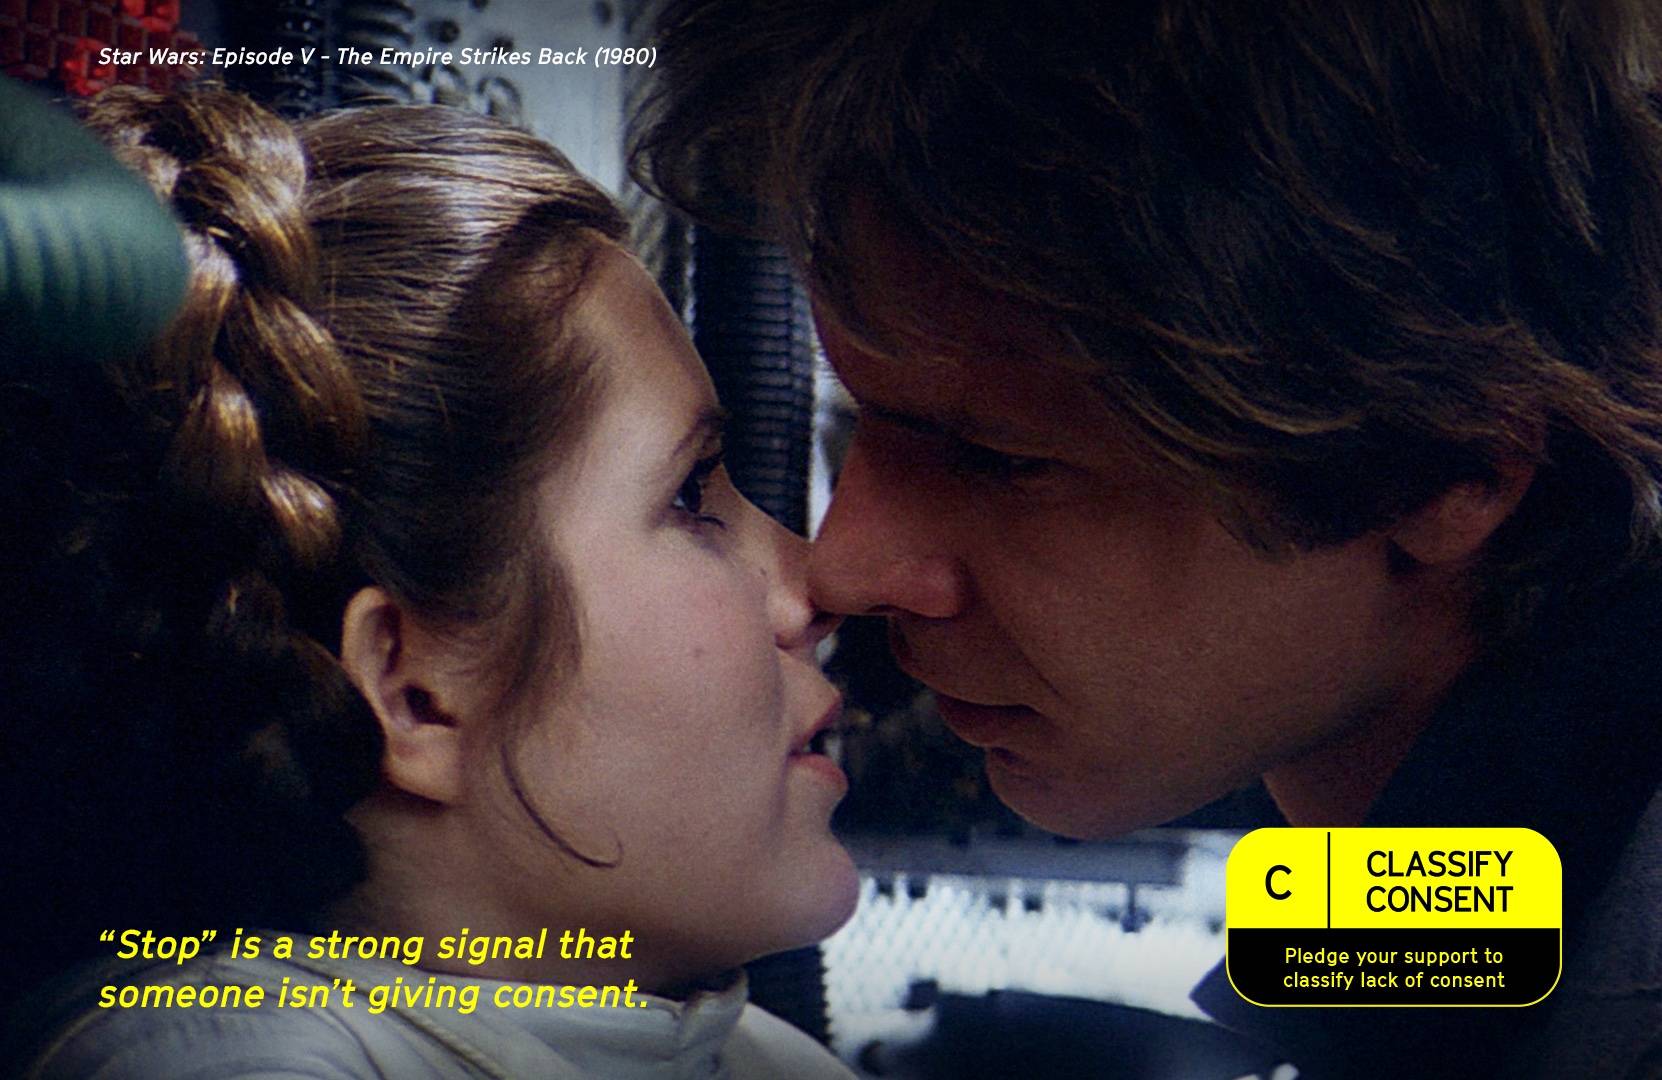 A scene from Star Wars shows Princess Leia being kissed after she said "stop." The classify consent rating appears on screen to denote this is an example of non-consent.